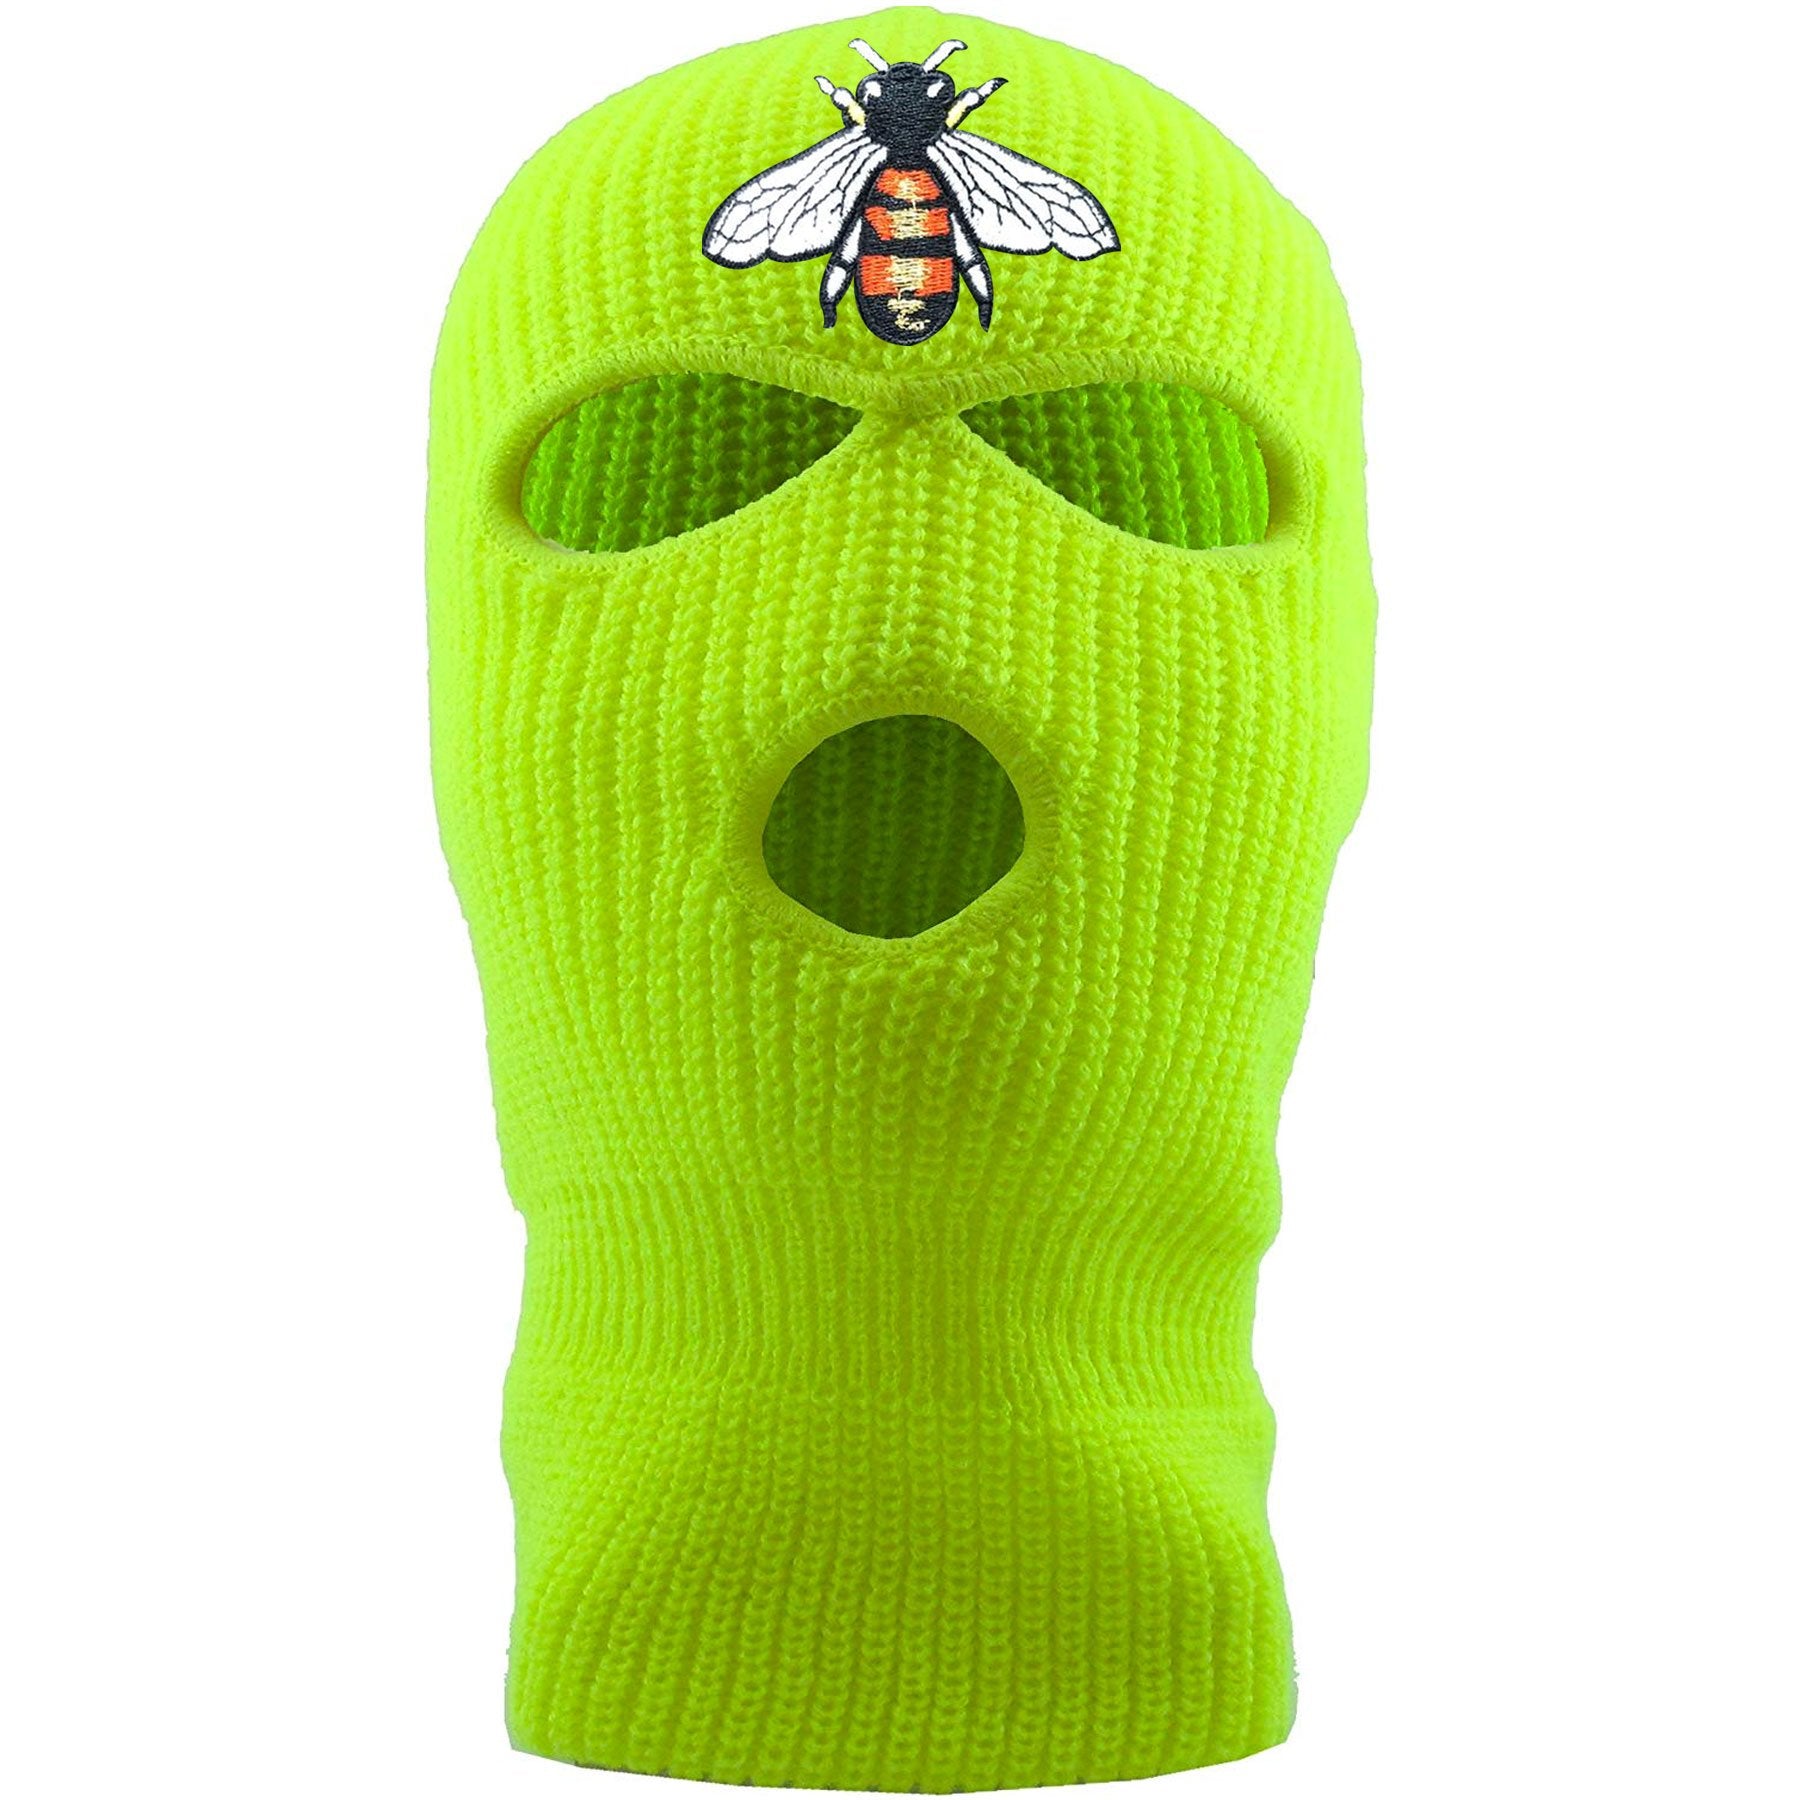 Embroidered on the front of the bumblebee safety yellow ski mask is the bumble bee logo embroidered in red, white, black, and gold Jackboys ski mask